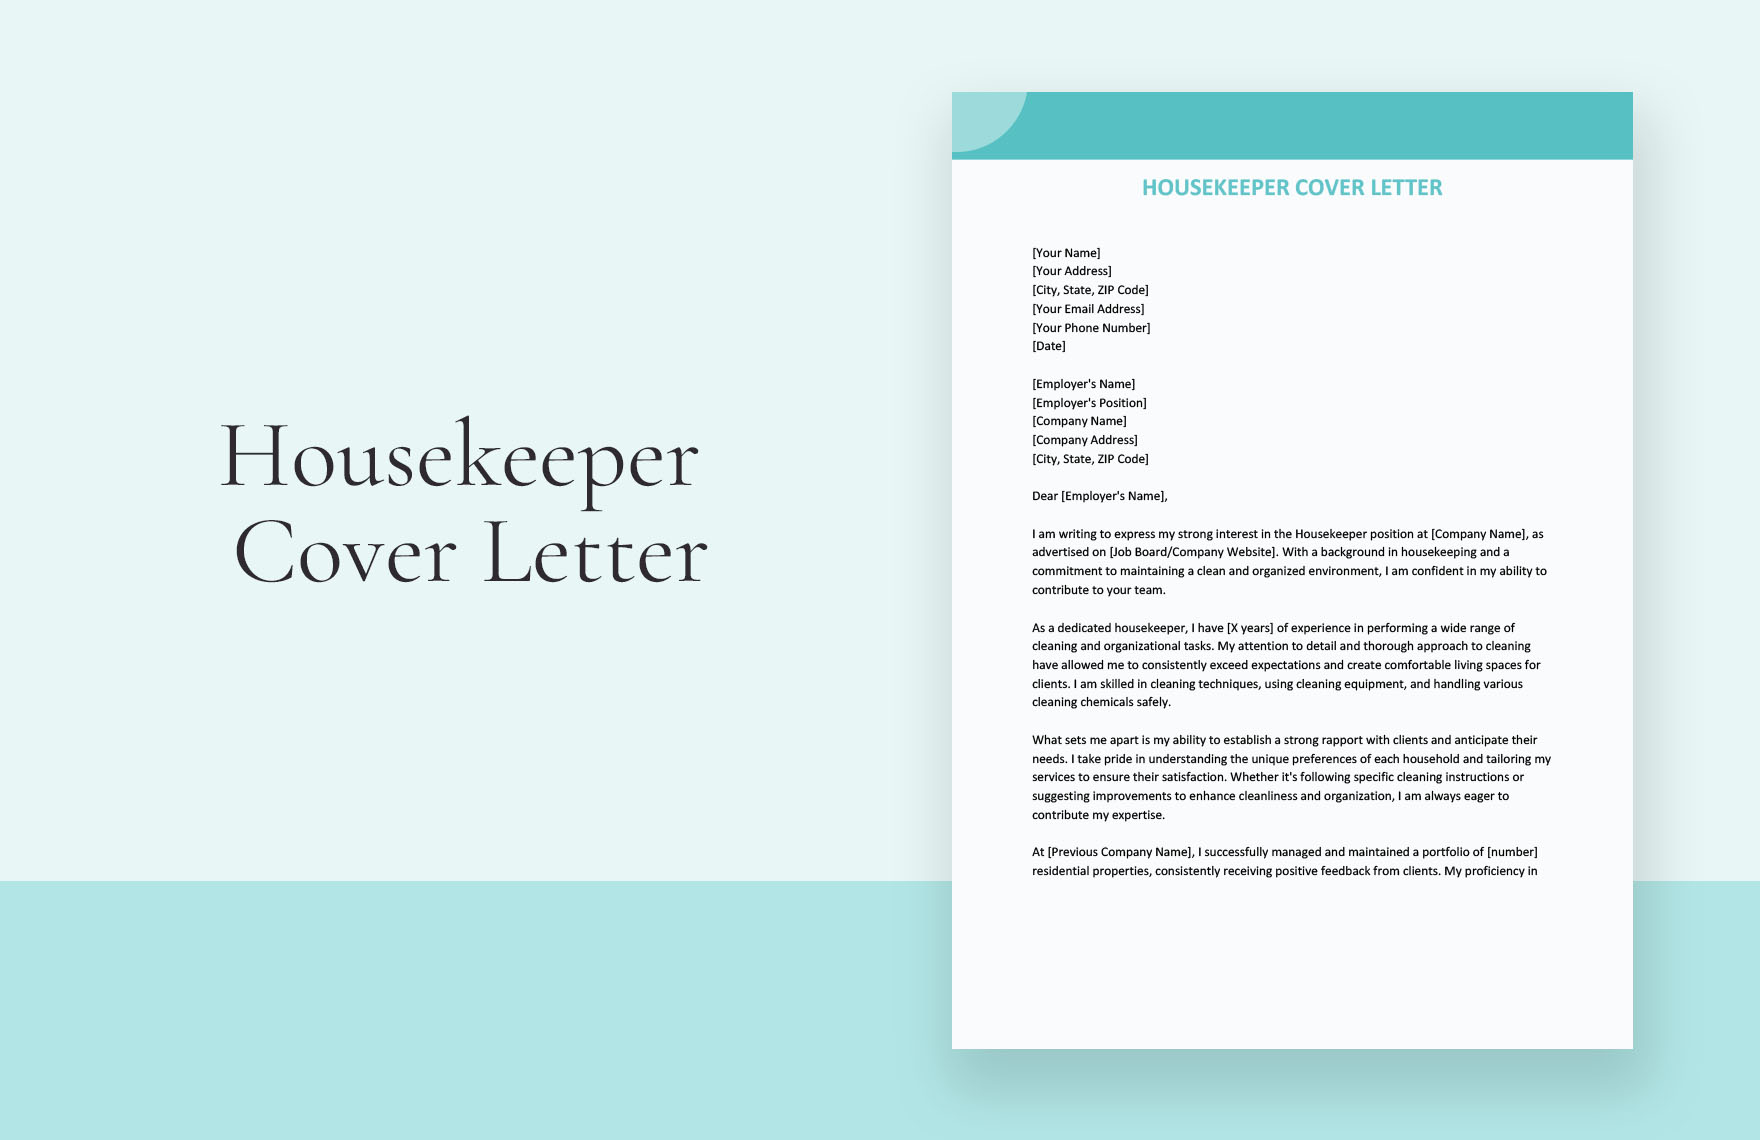 Housekeeper Cover Letter in Word, Google Docs